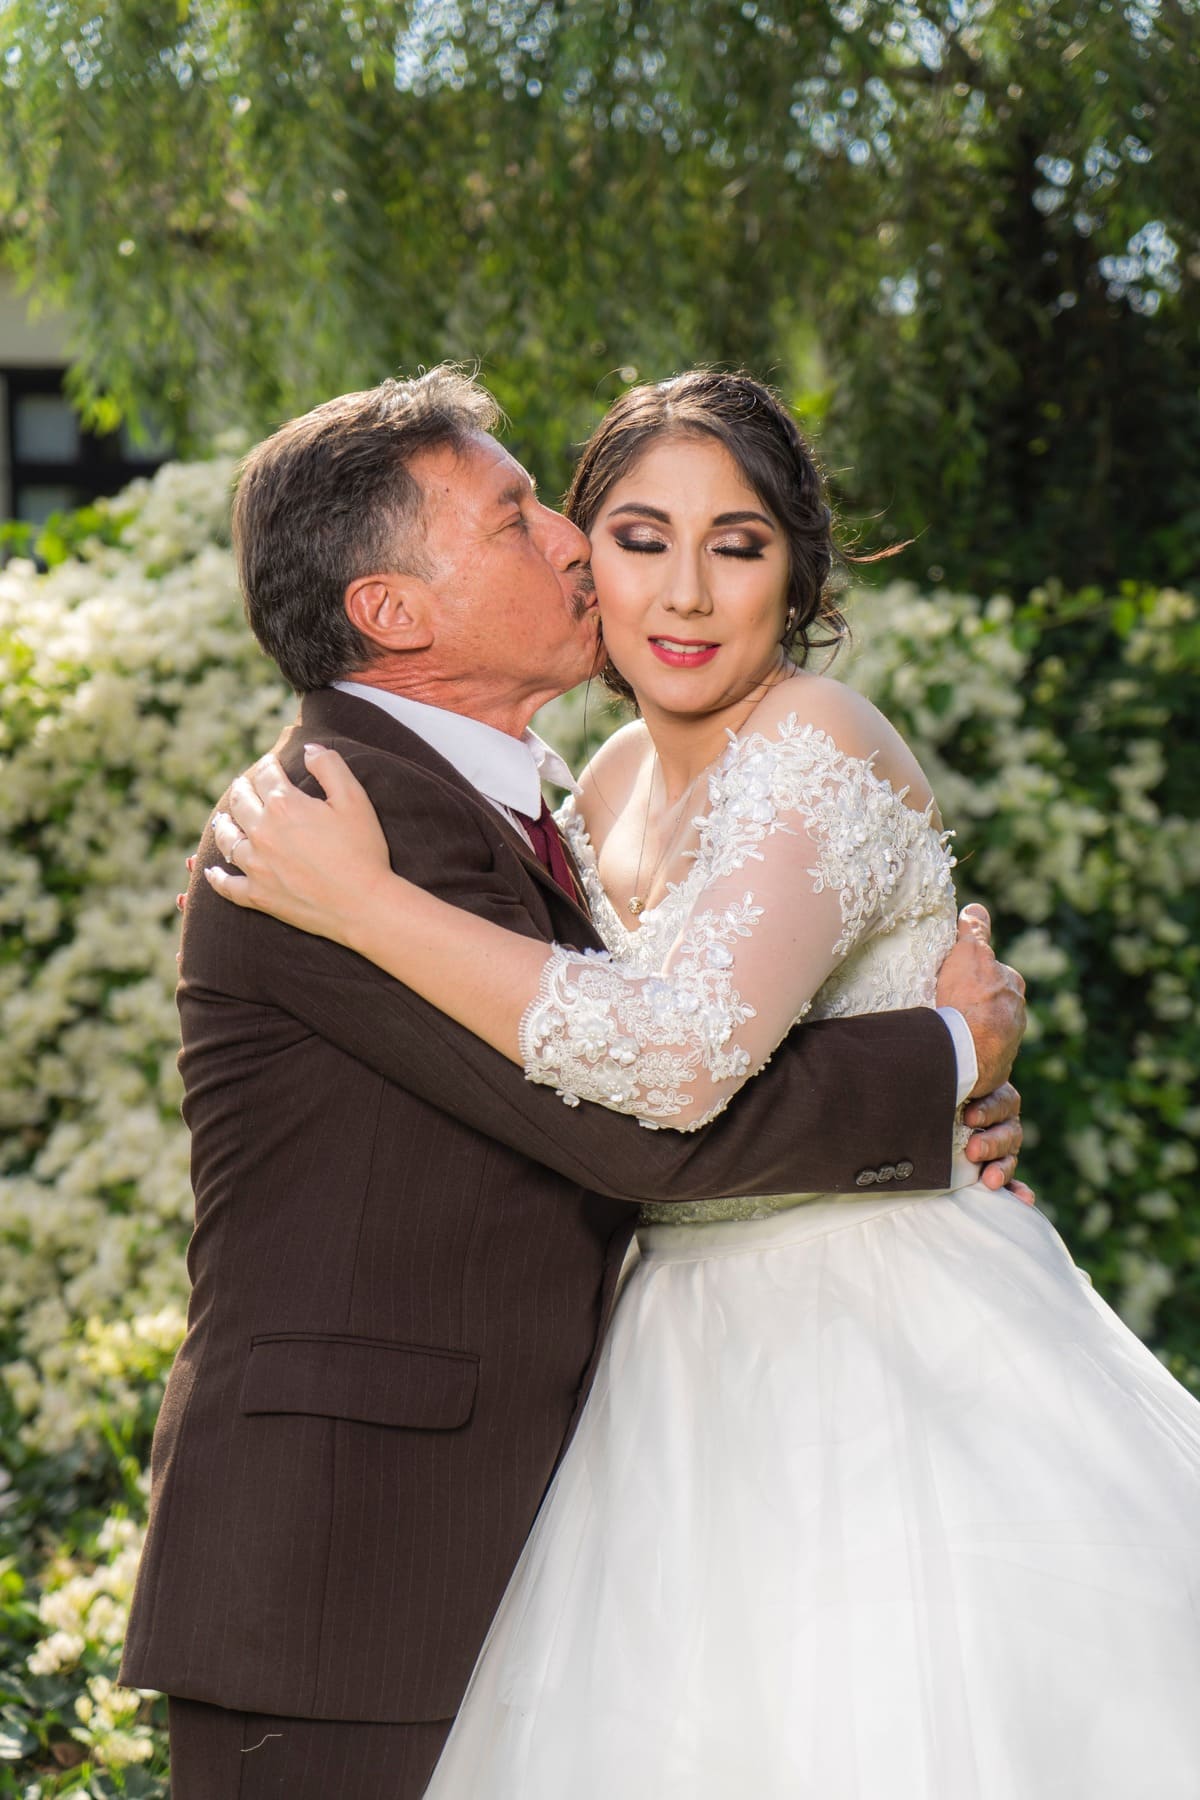 Father Kissing His Daughter on the Cheek on Her Wedding Day